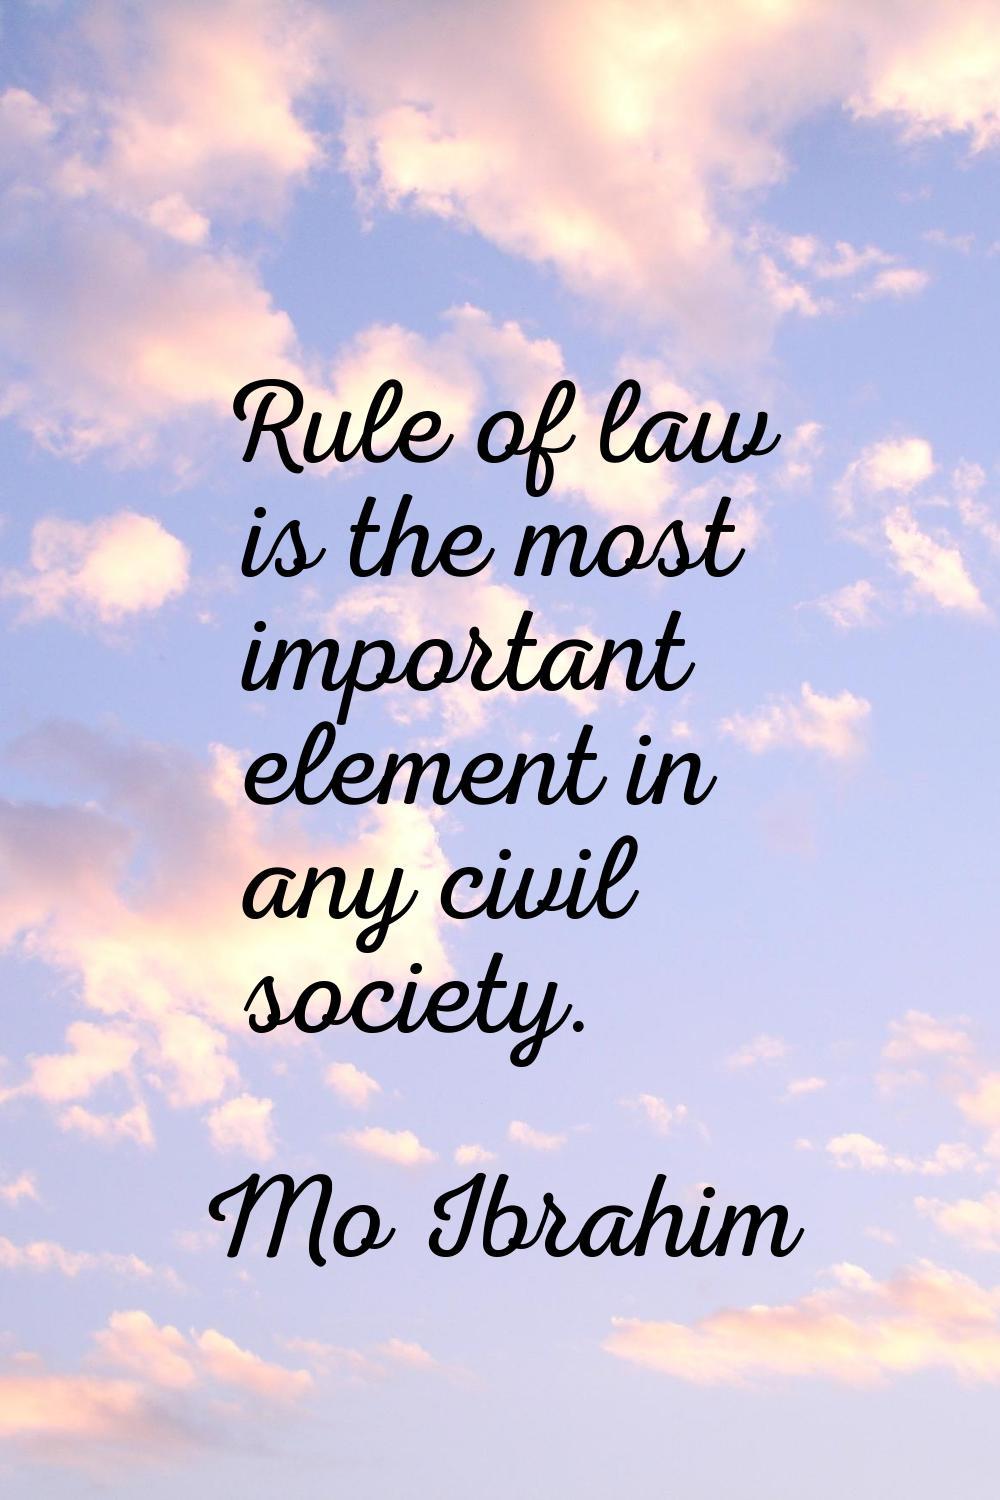 Rule of law is the most important element in any civil society.